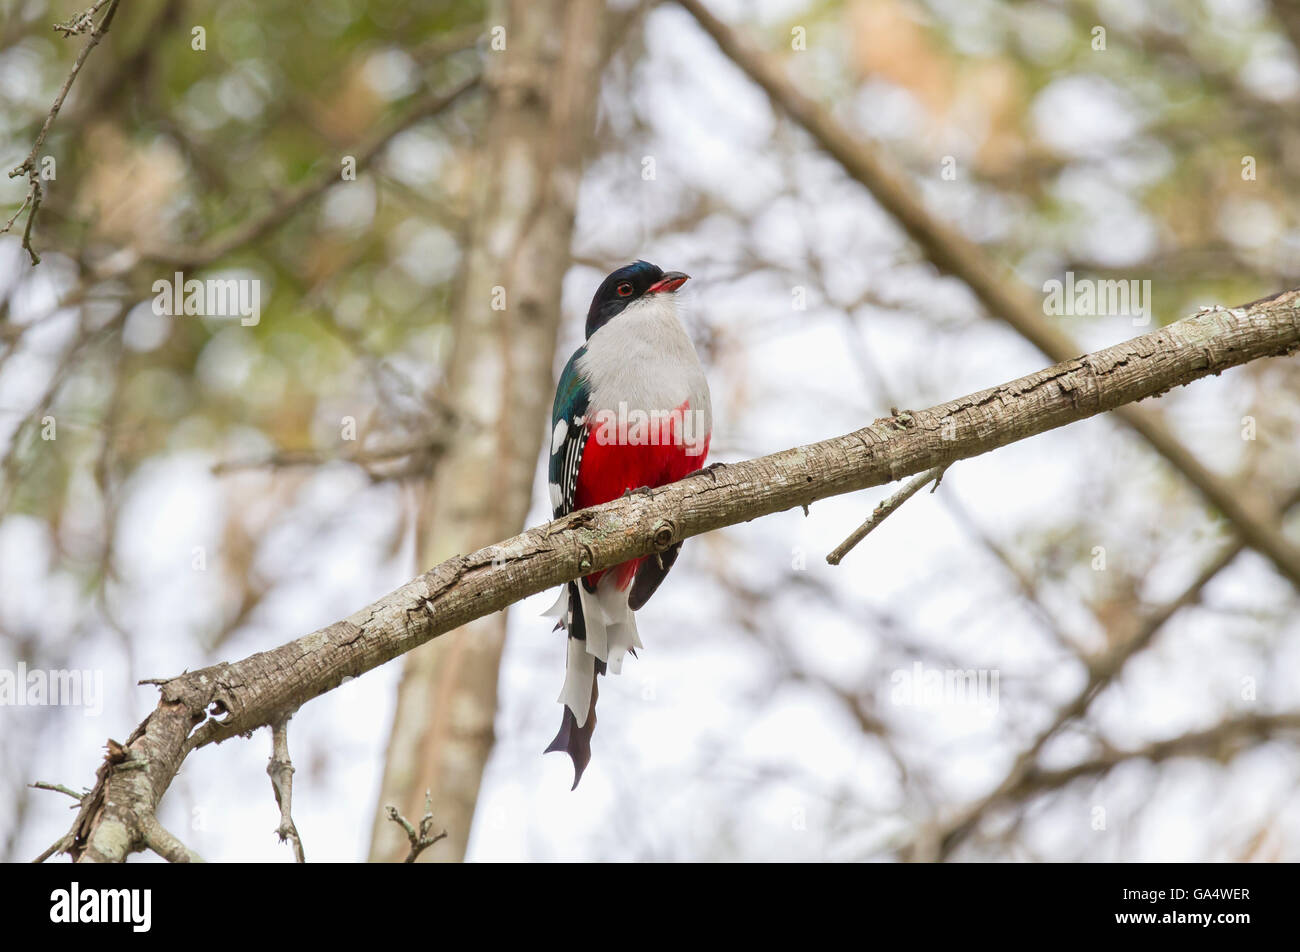 Cuban Trogon, endemic to Cuba where it is also the national bird, perched on a branch in a nature reserve near Hacienda La Belen Stock Photo